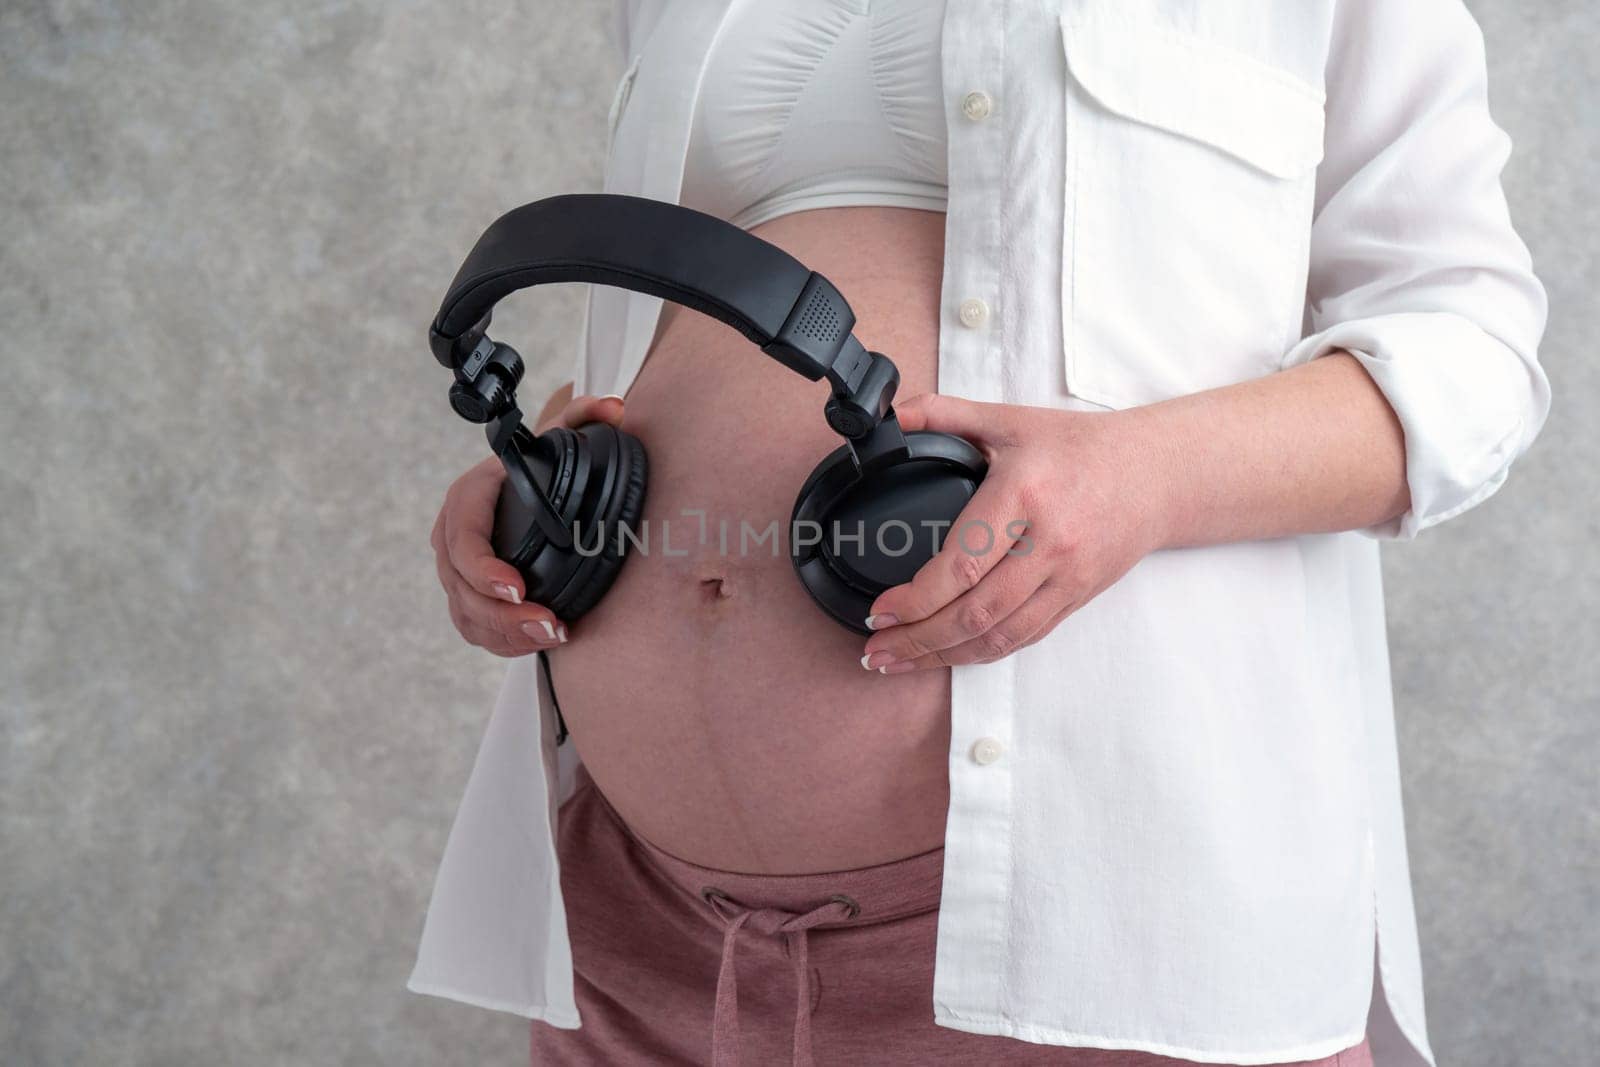 Pregnant woman playing music to her baby through headphones putting them on her belly by Mariakray